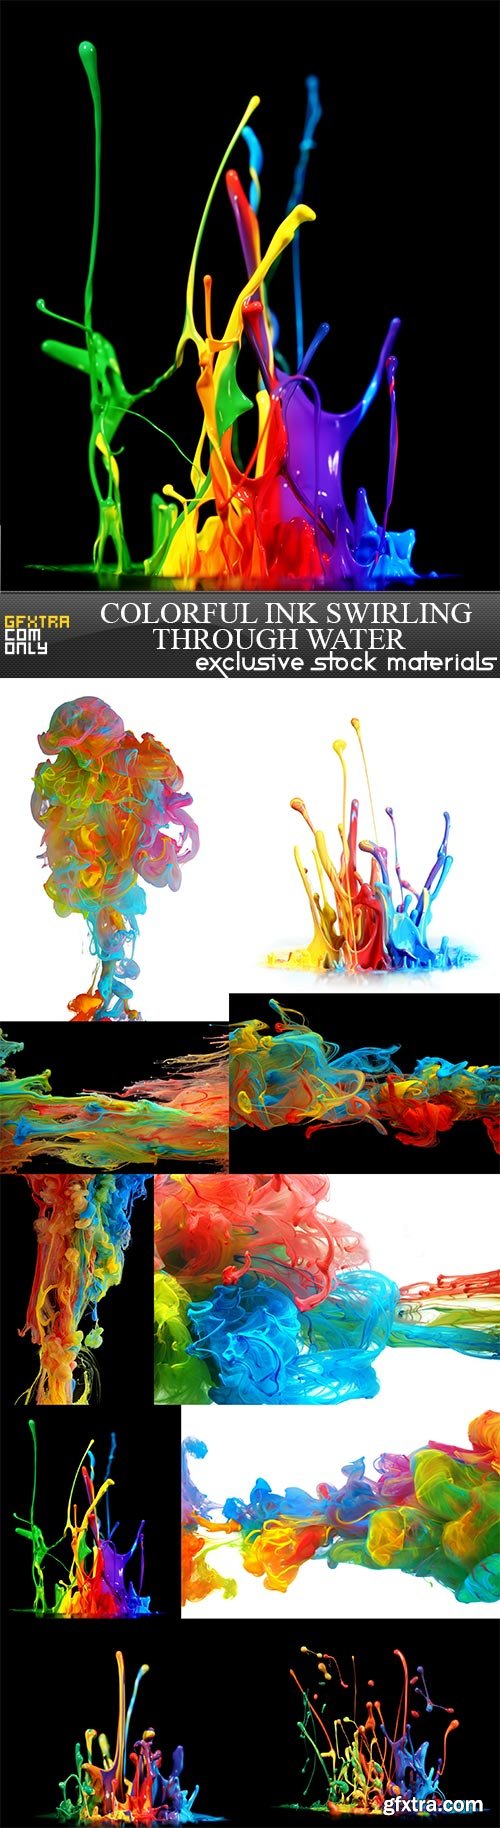 Colorful ink swirling through water, 10 x UHQ JPEG